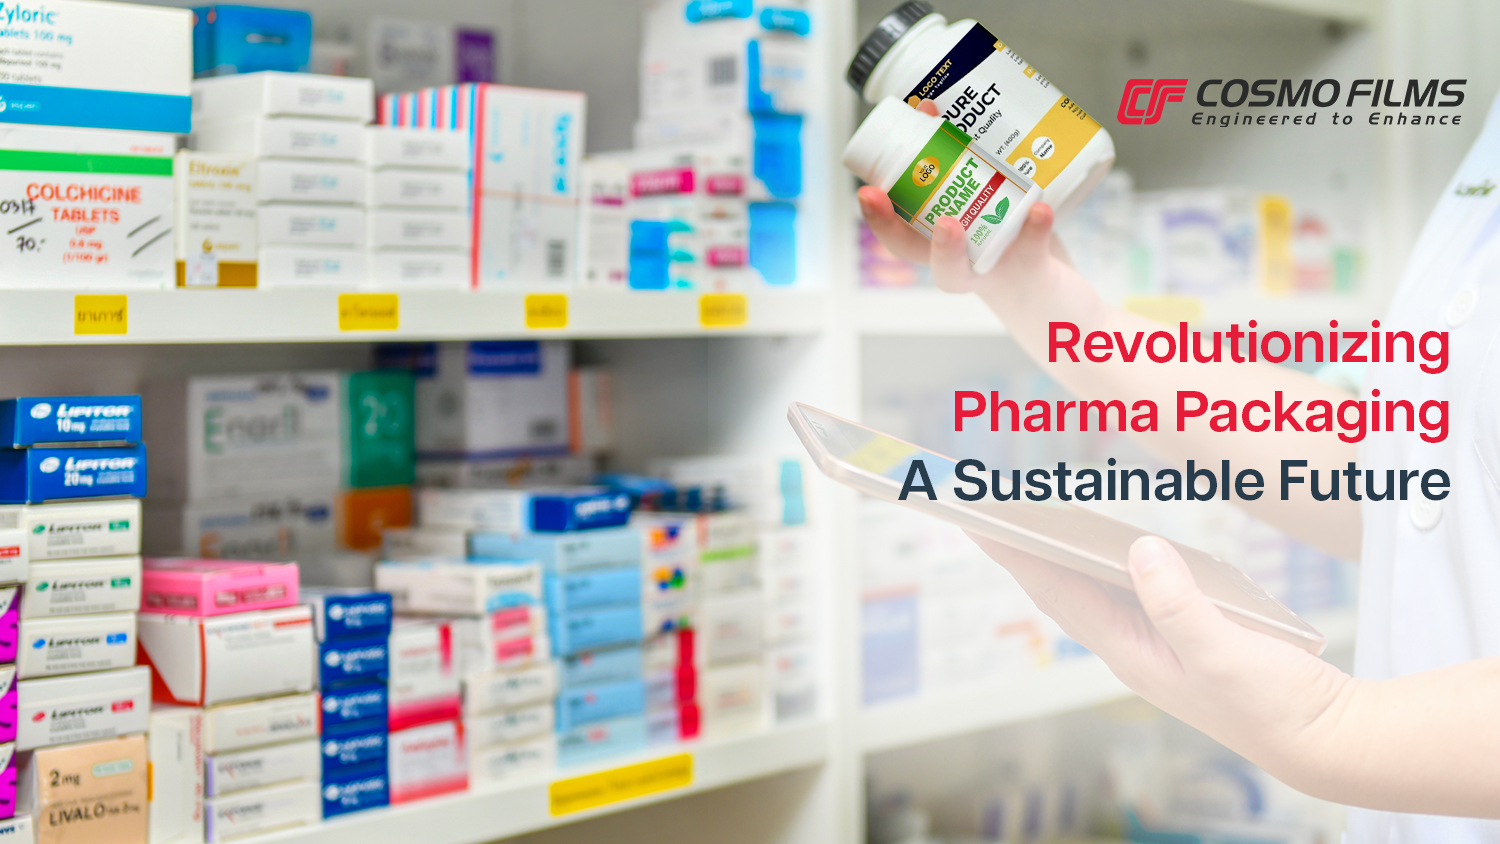 Revolutionizing Pharma Packaging: A Sustainable Future